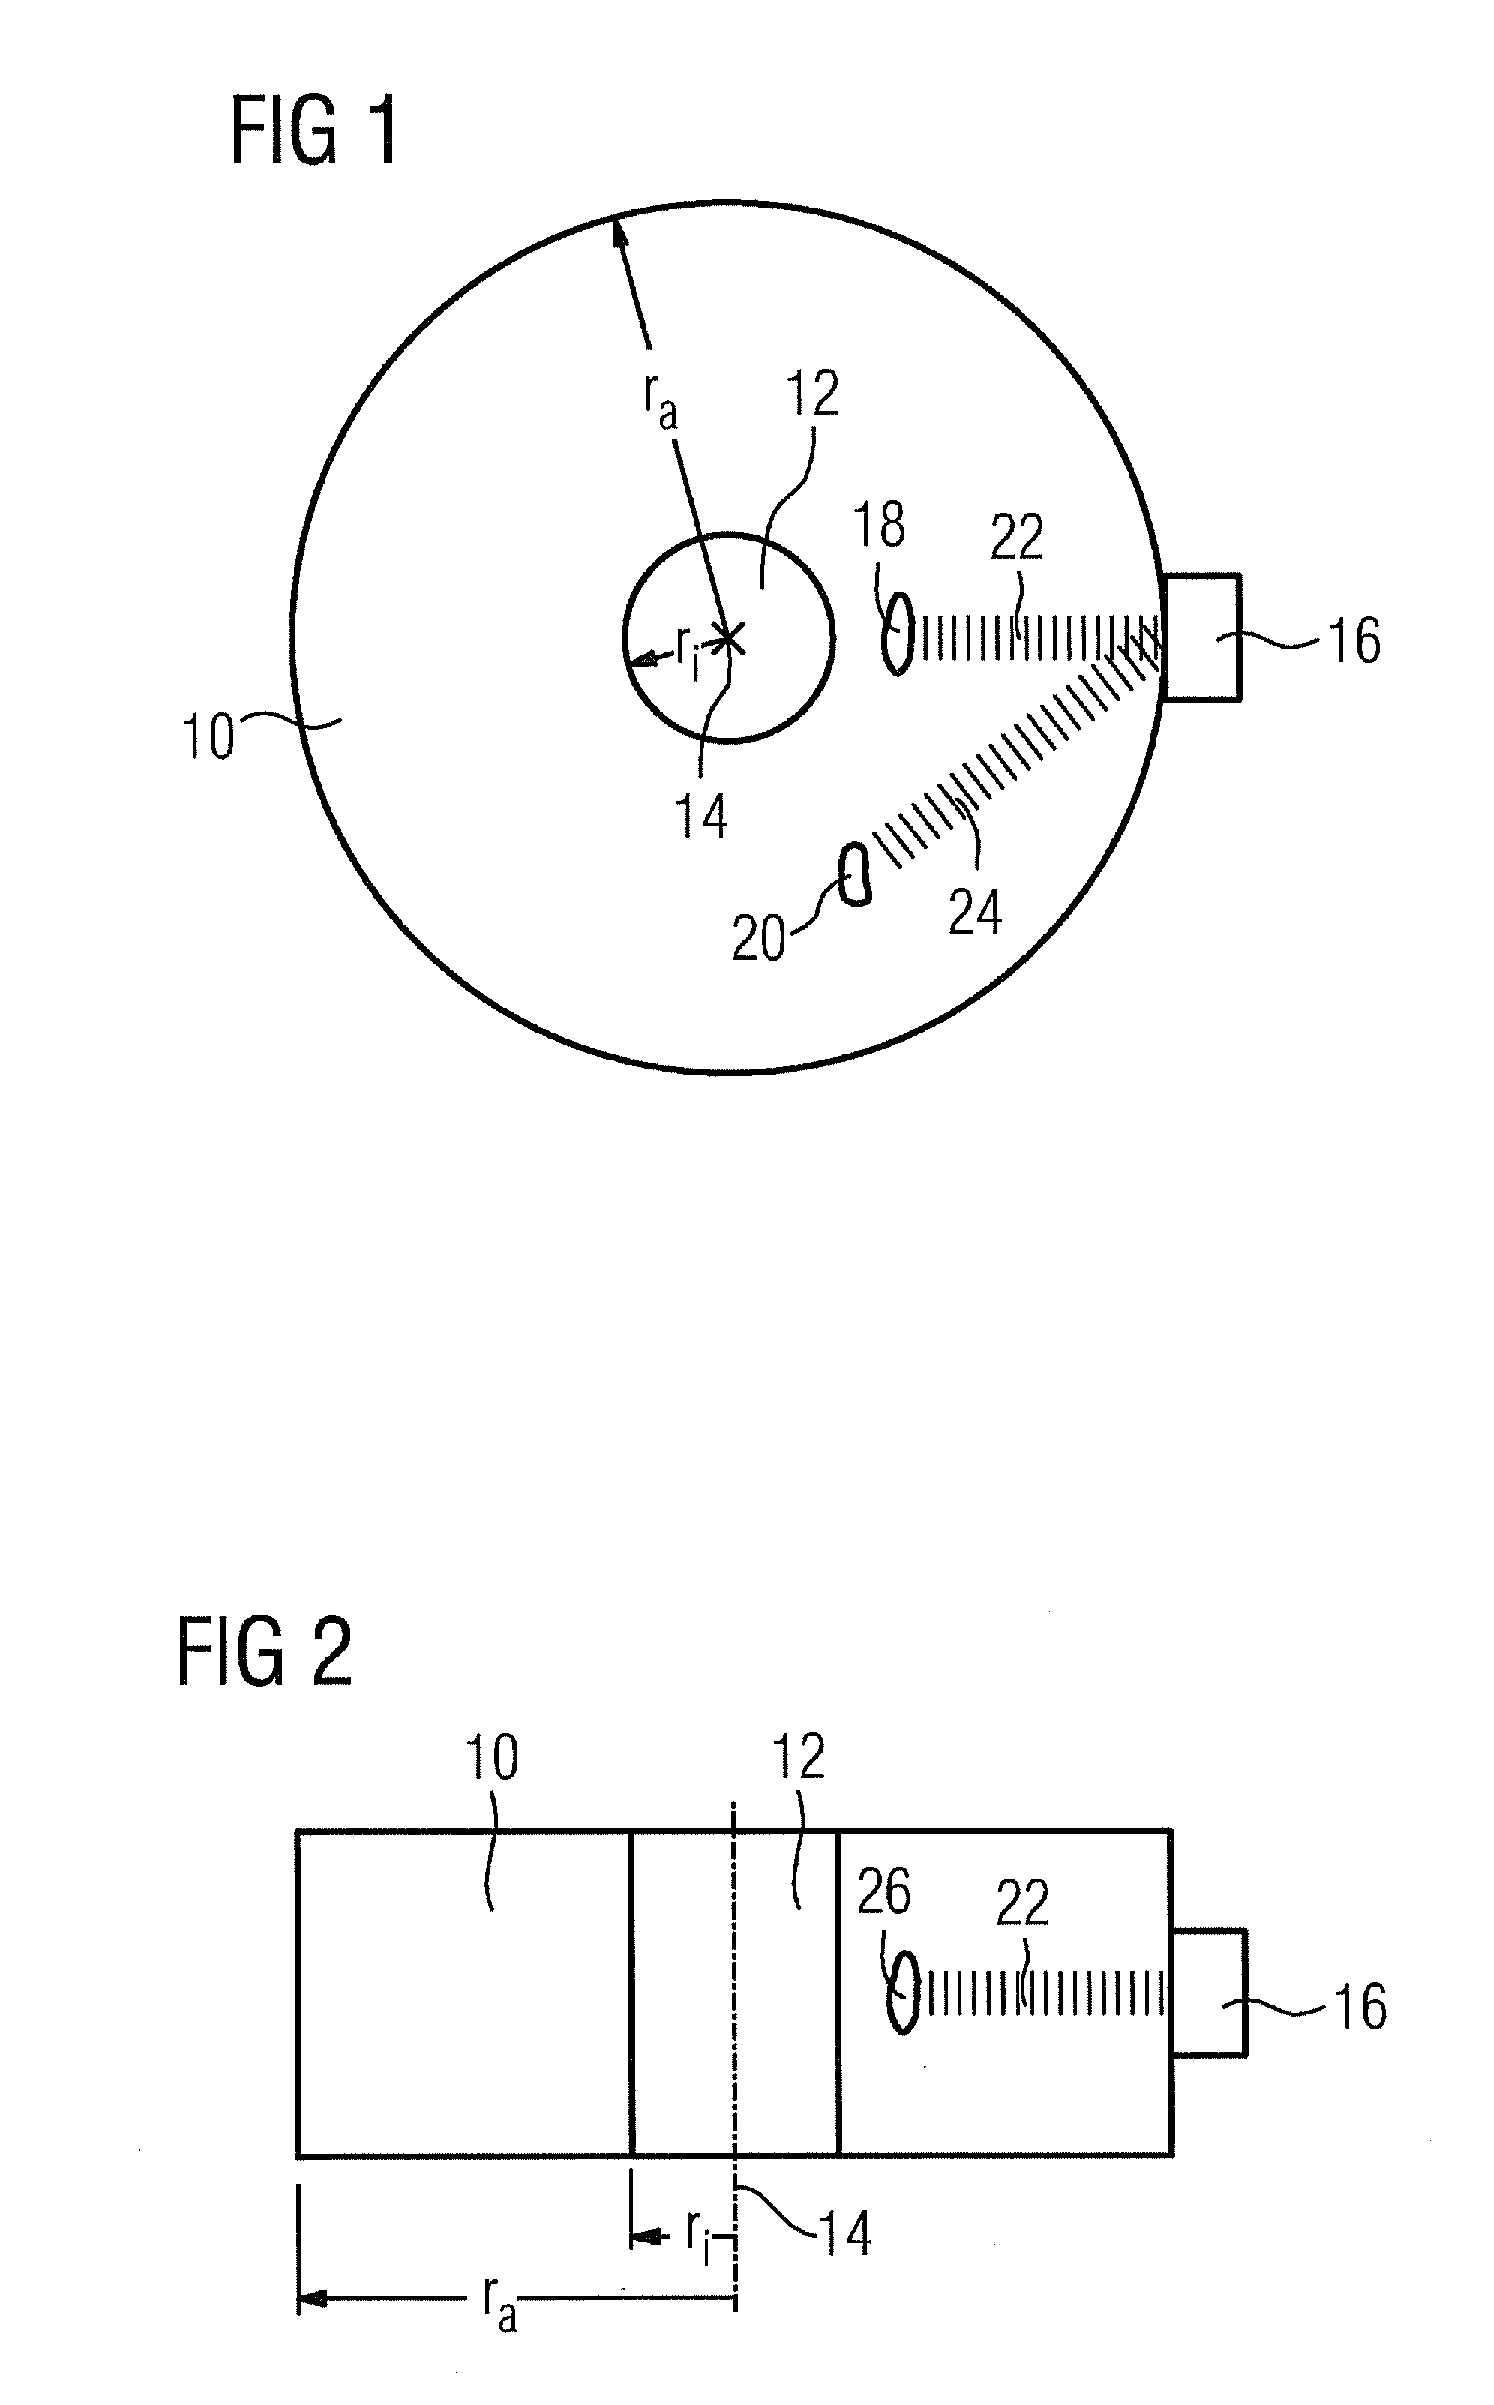 Method and device for non-destructive material testing of a test object using ultrasonic waves